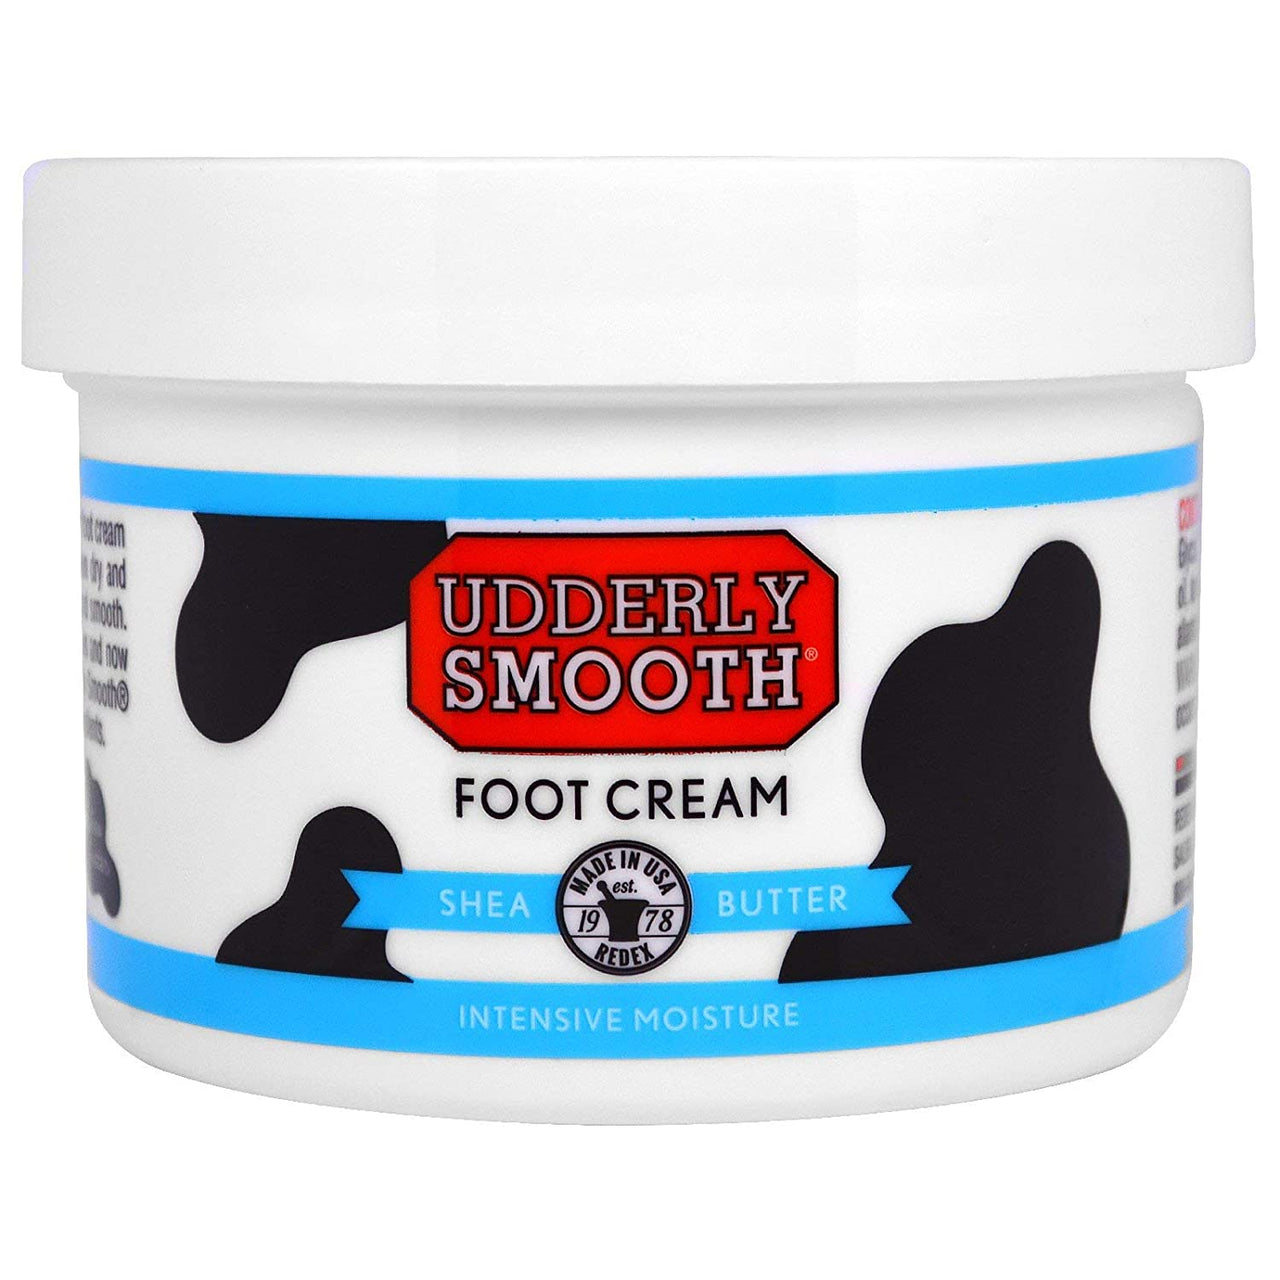 Udderly Smooth Shea Butter Foot Cream  227gm